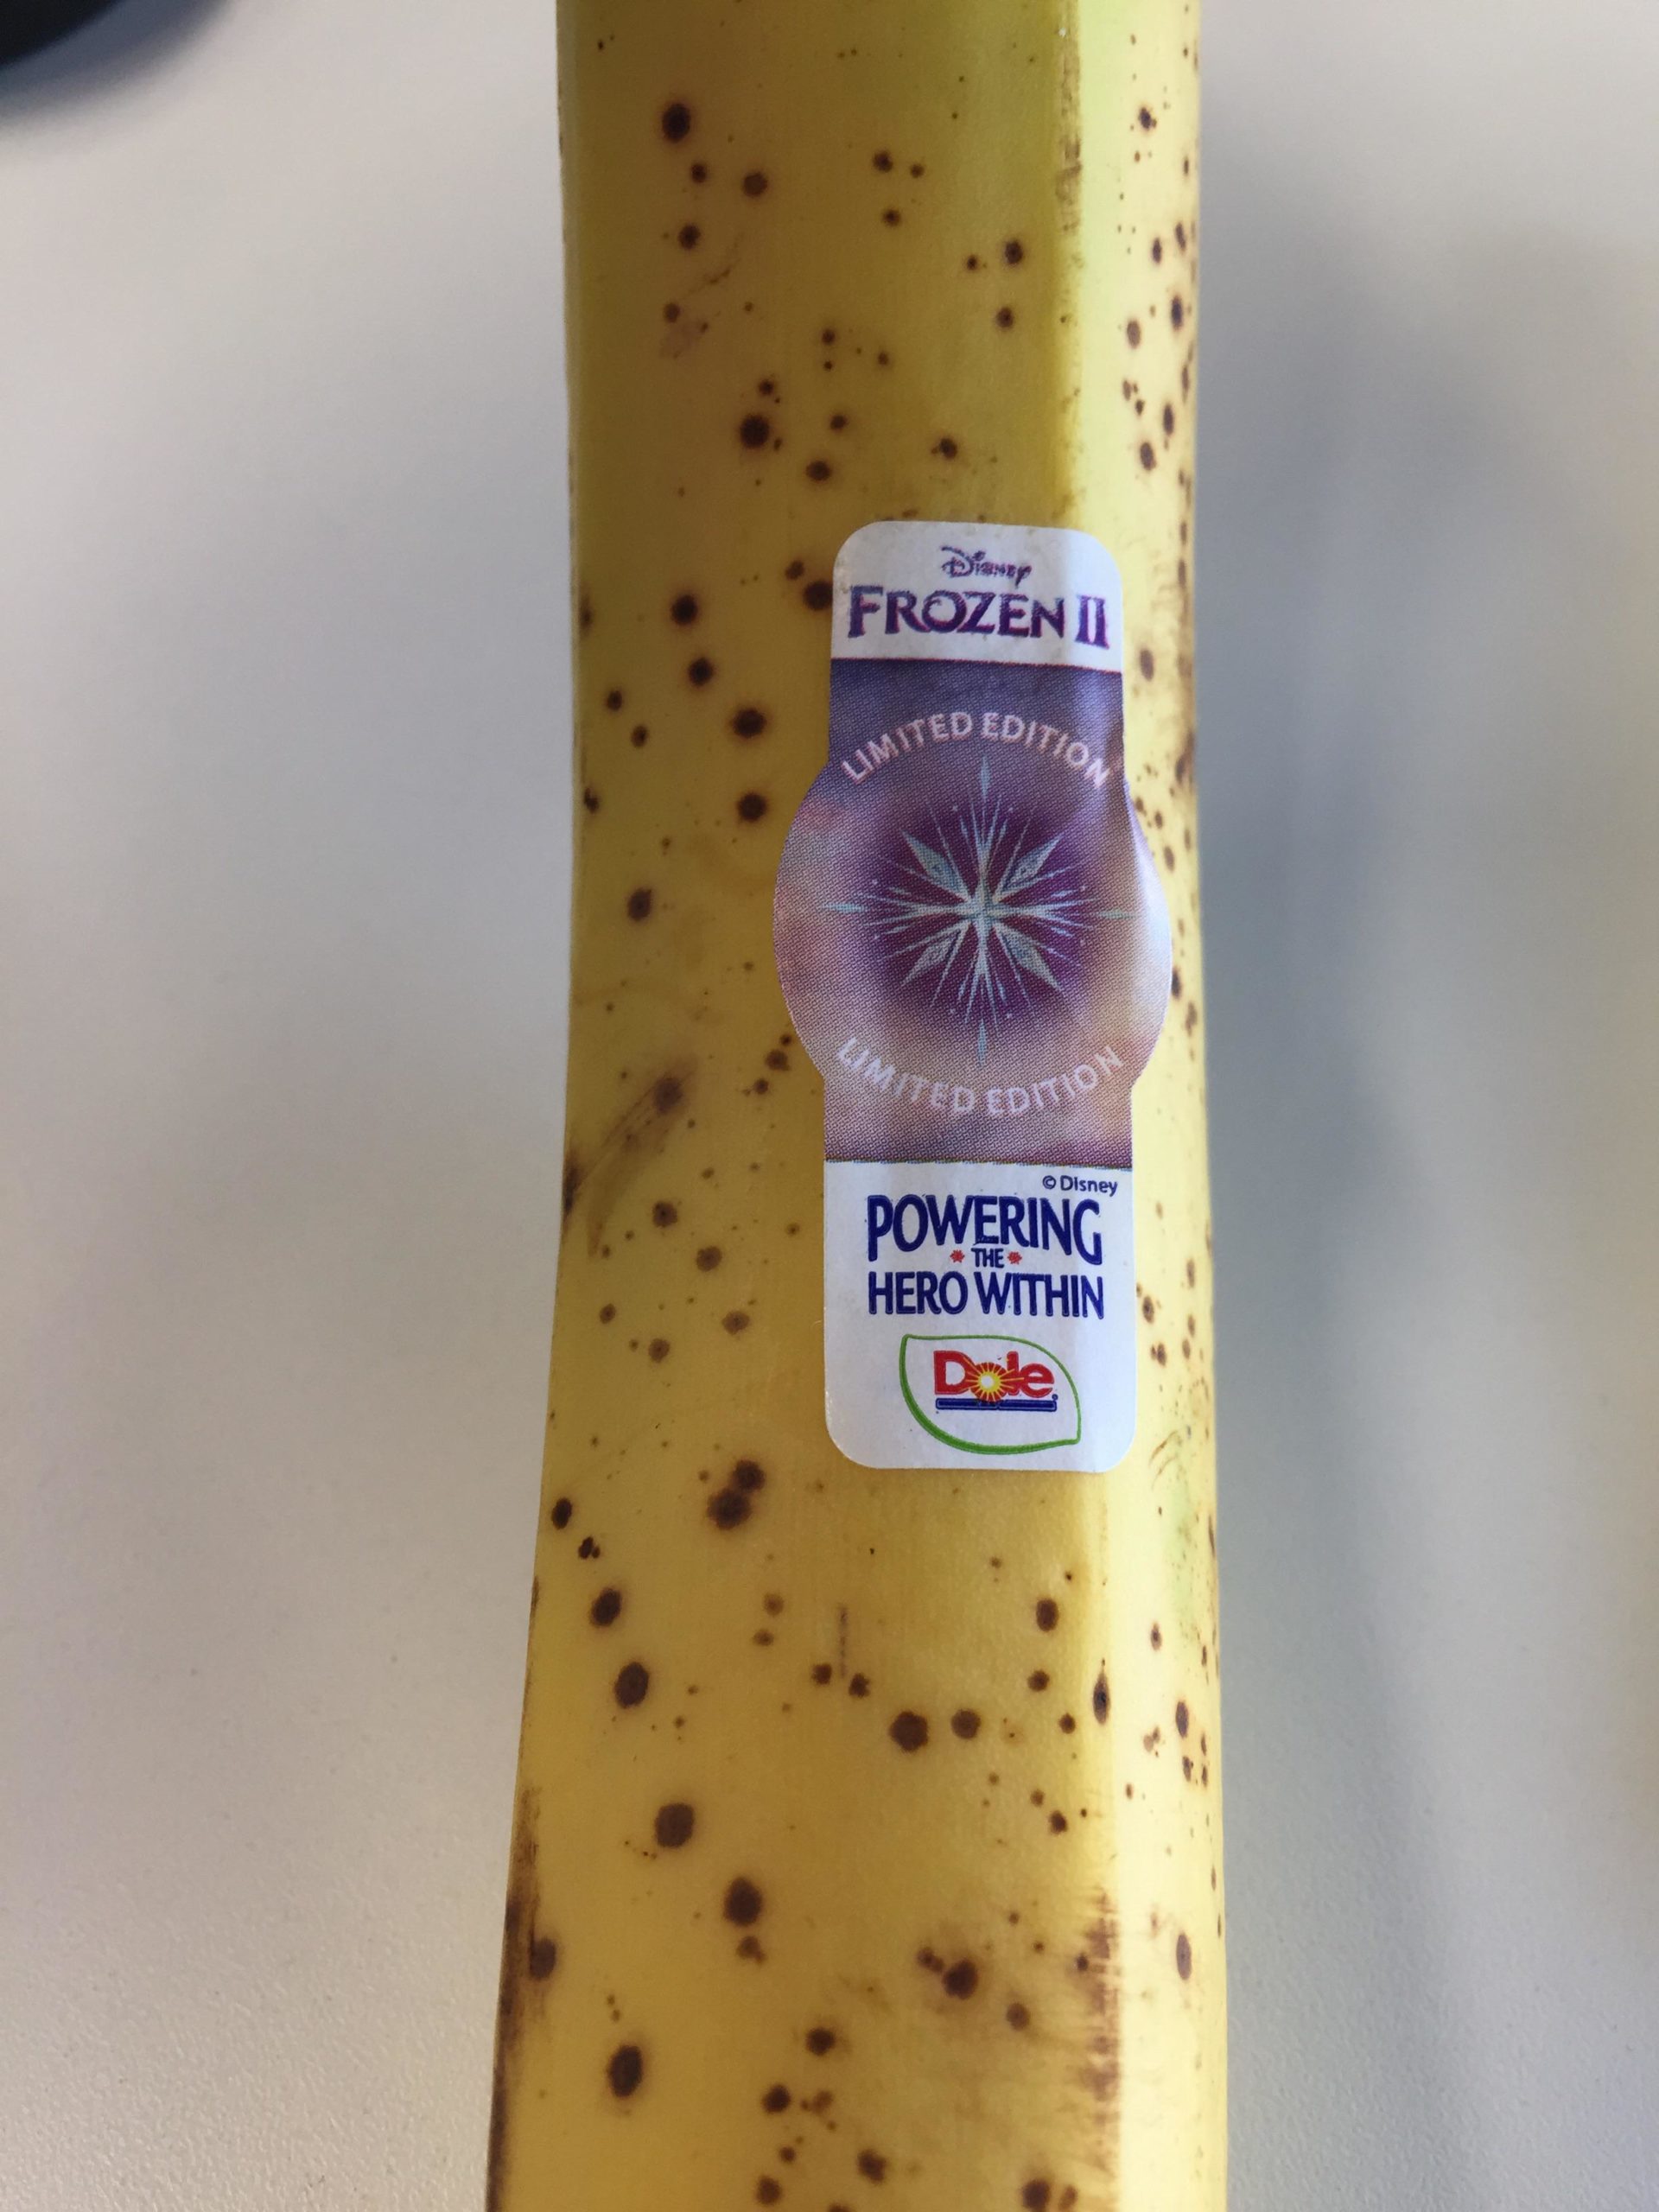 %2ALimited+Edition%2A+Frozen+2+banana%3F